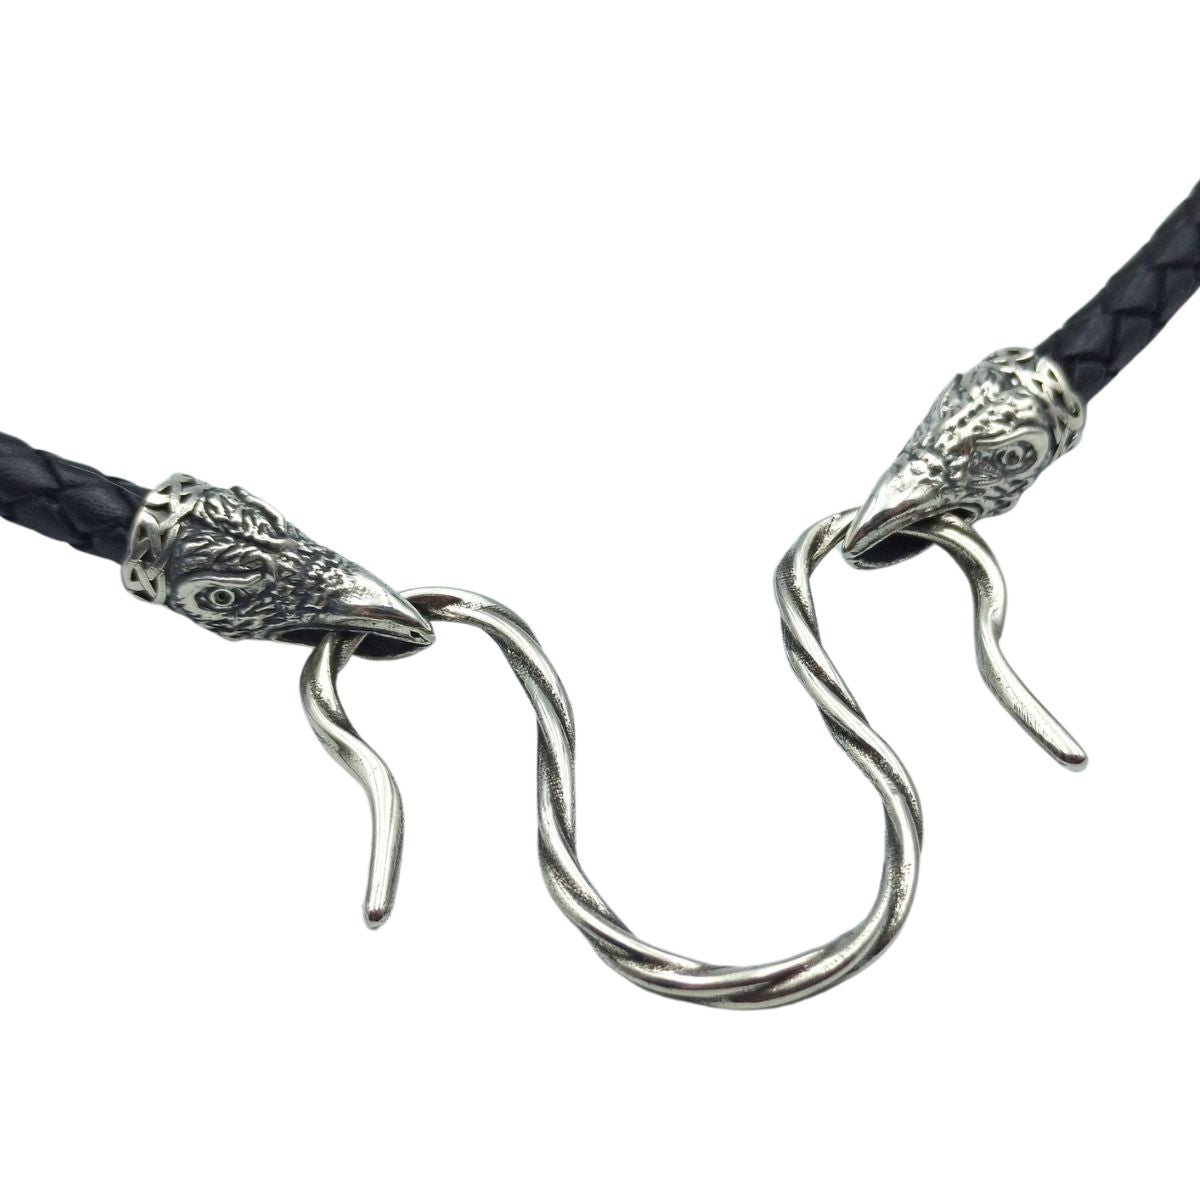 Raven leather necklace with Silver clasps